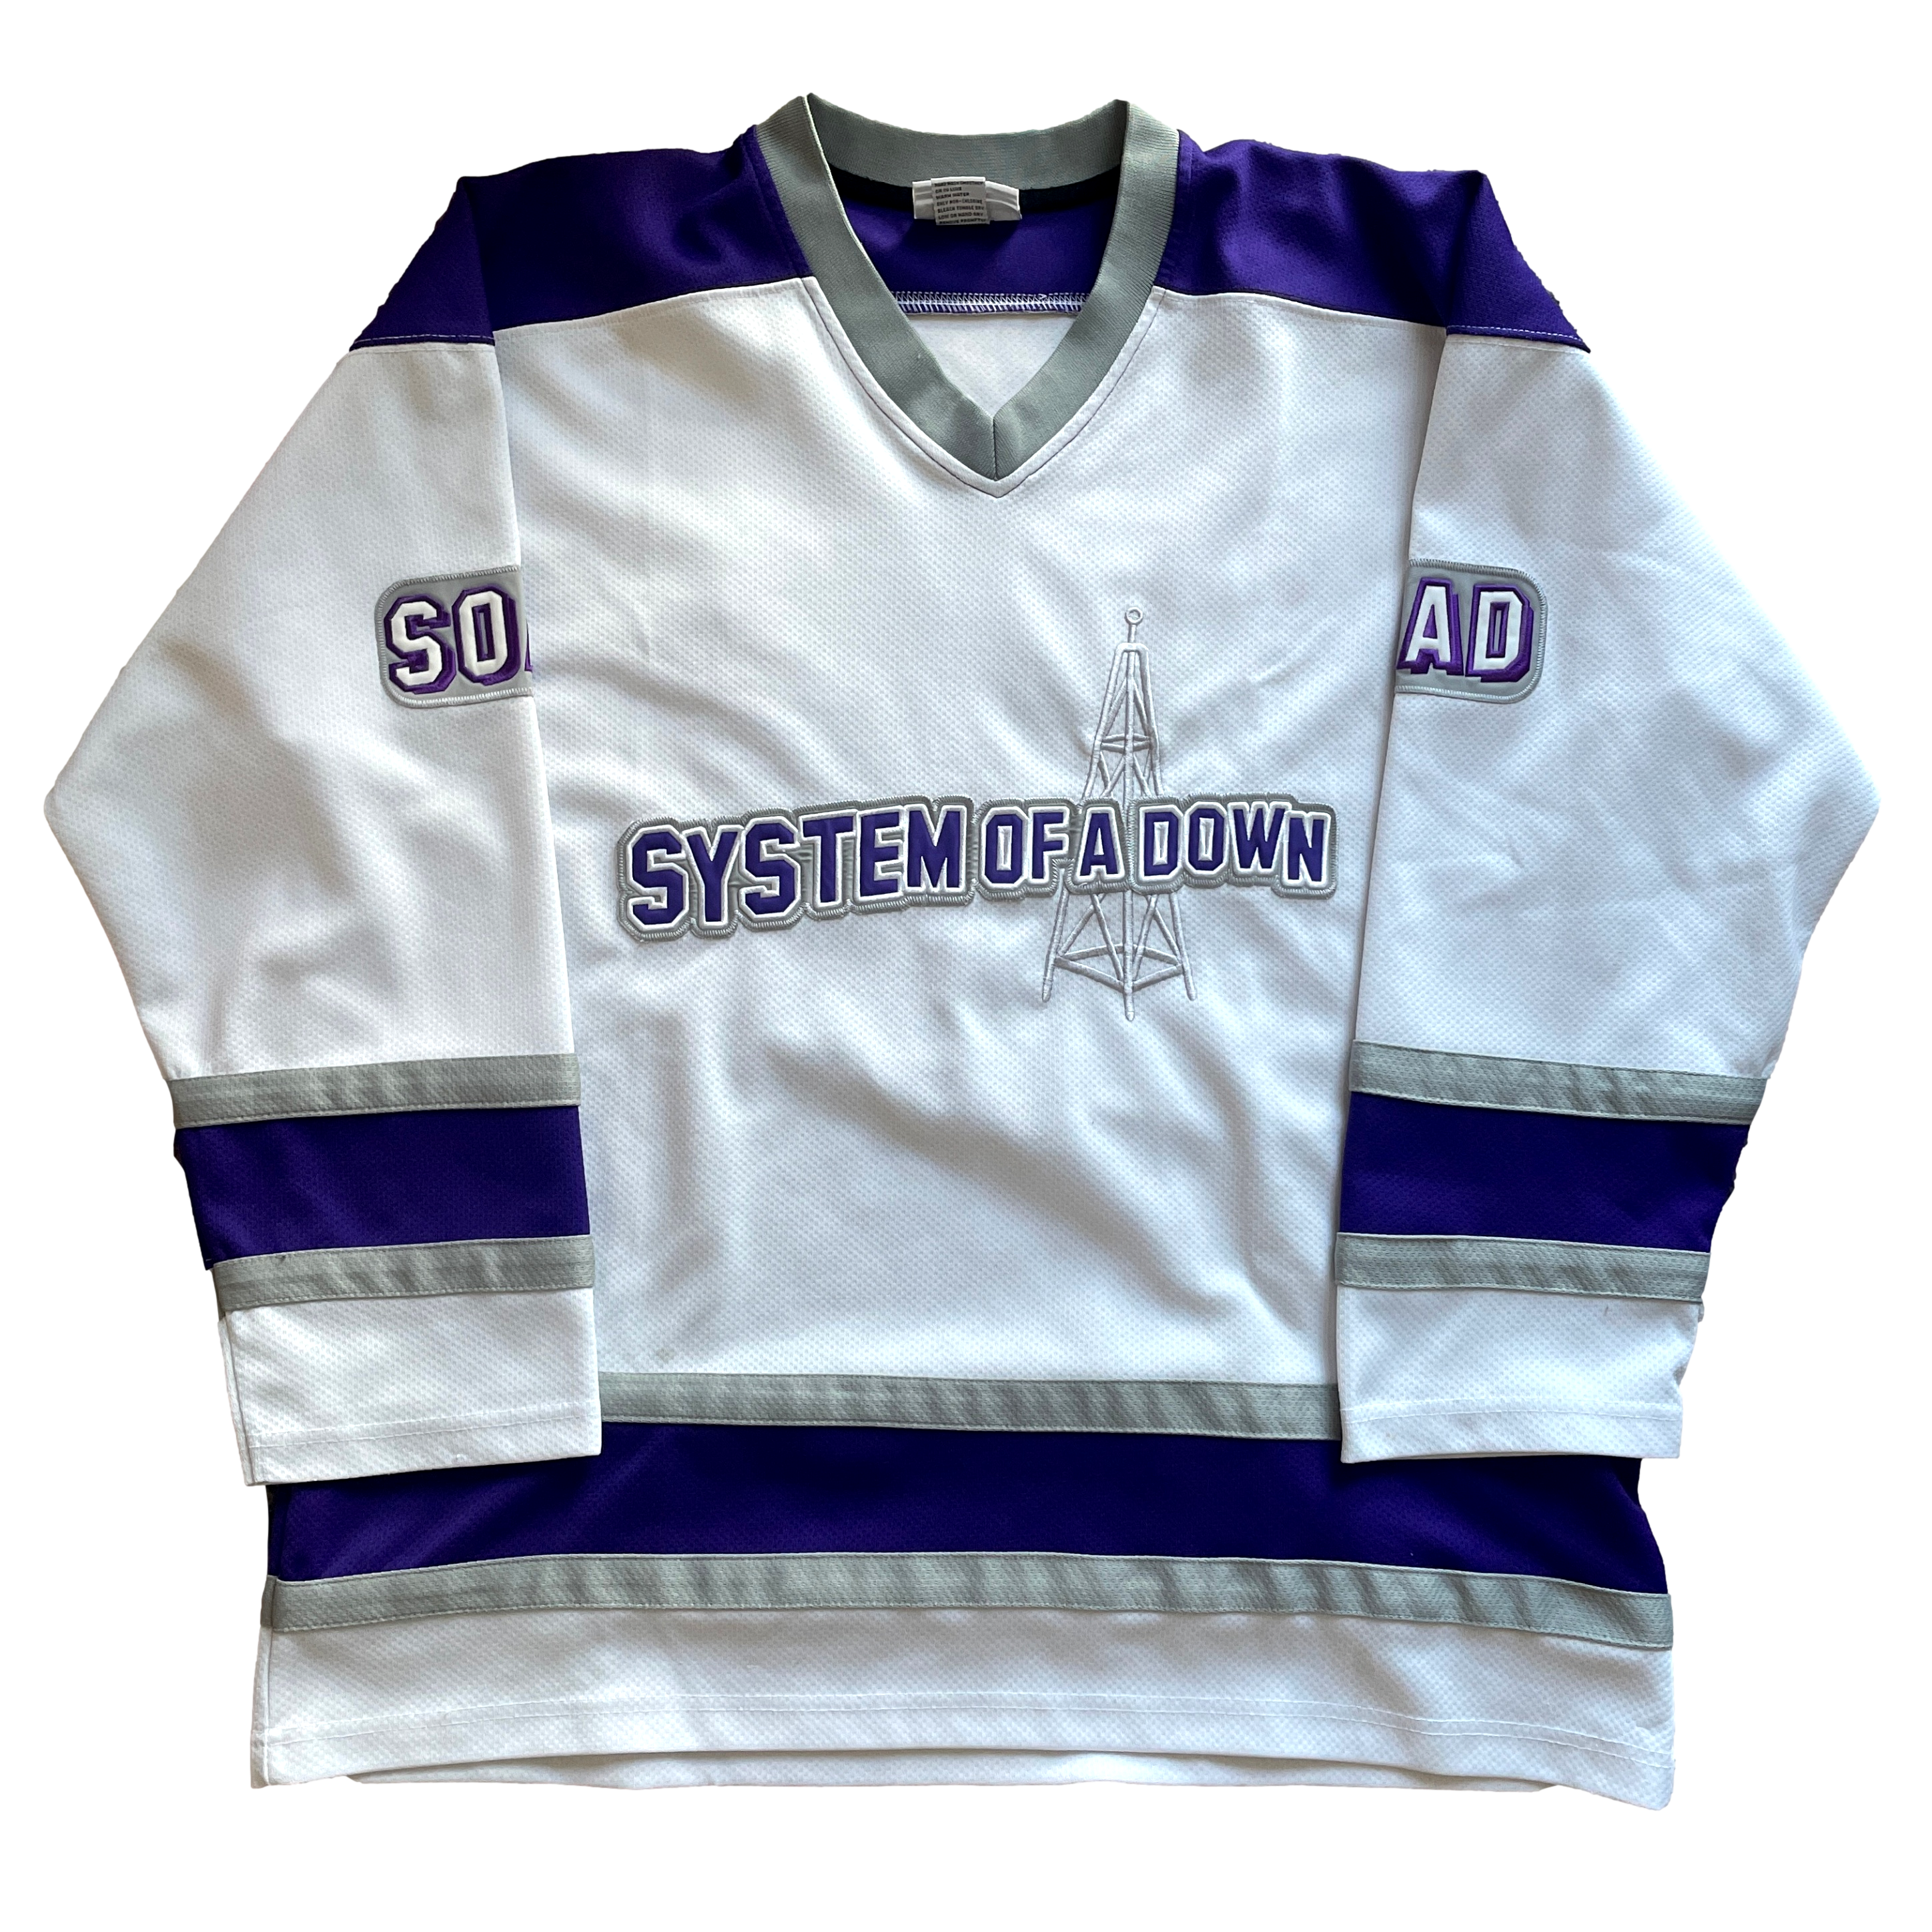 Vintage System of a Down Hockey Jersey (L)